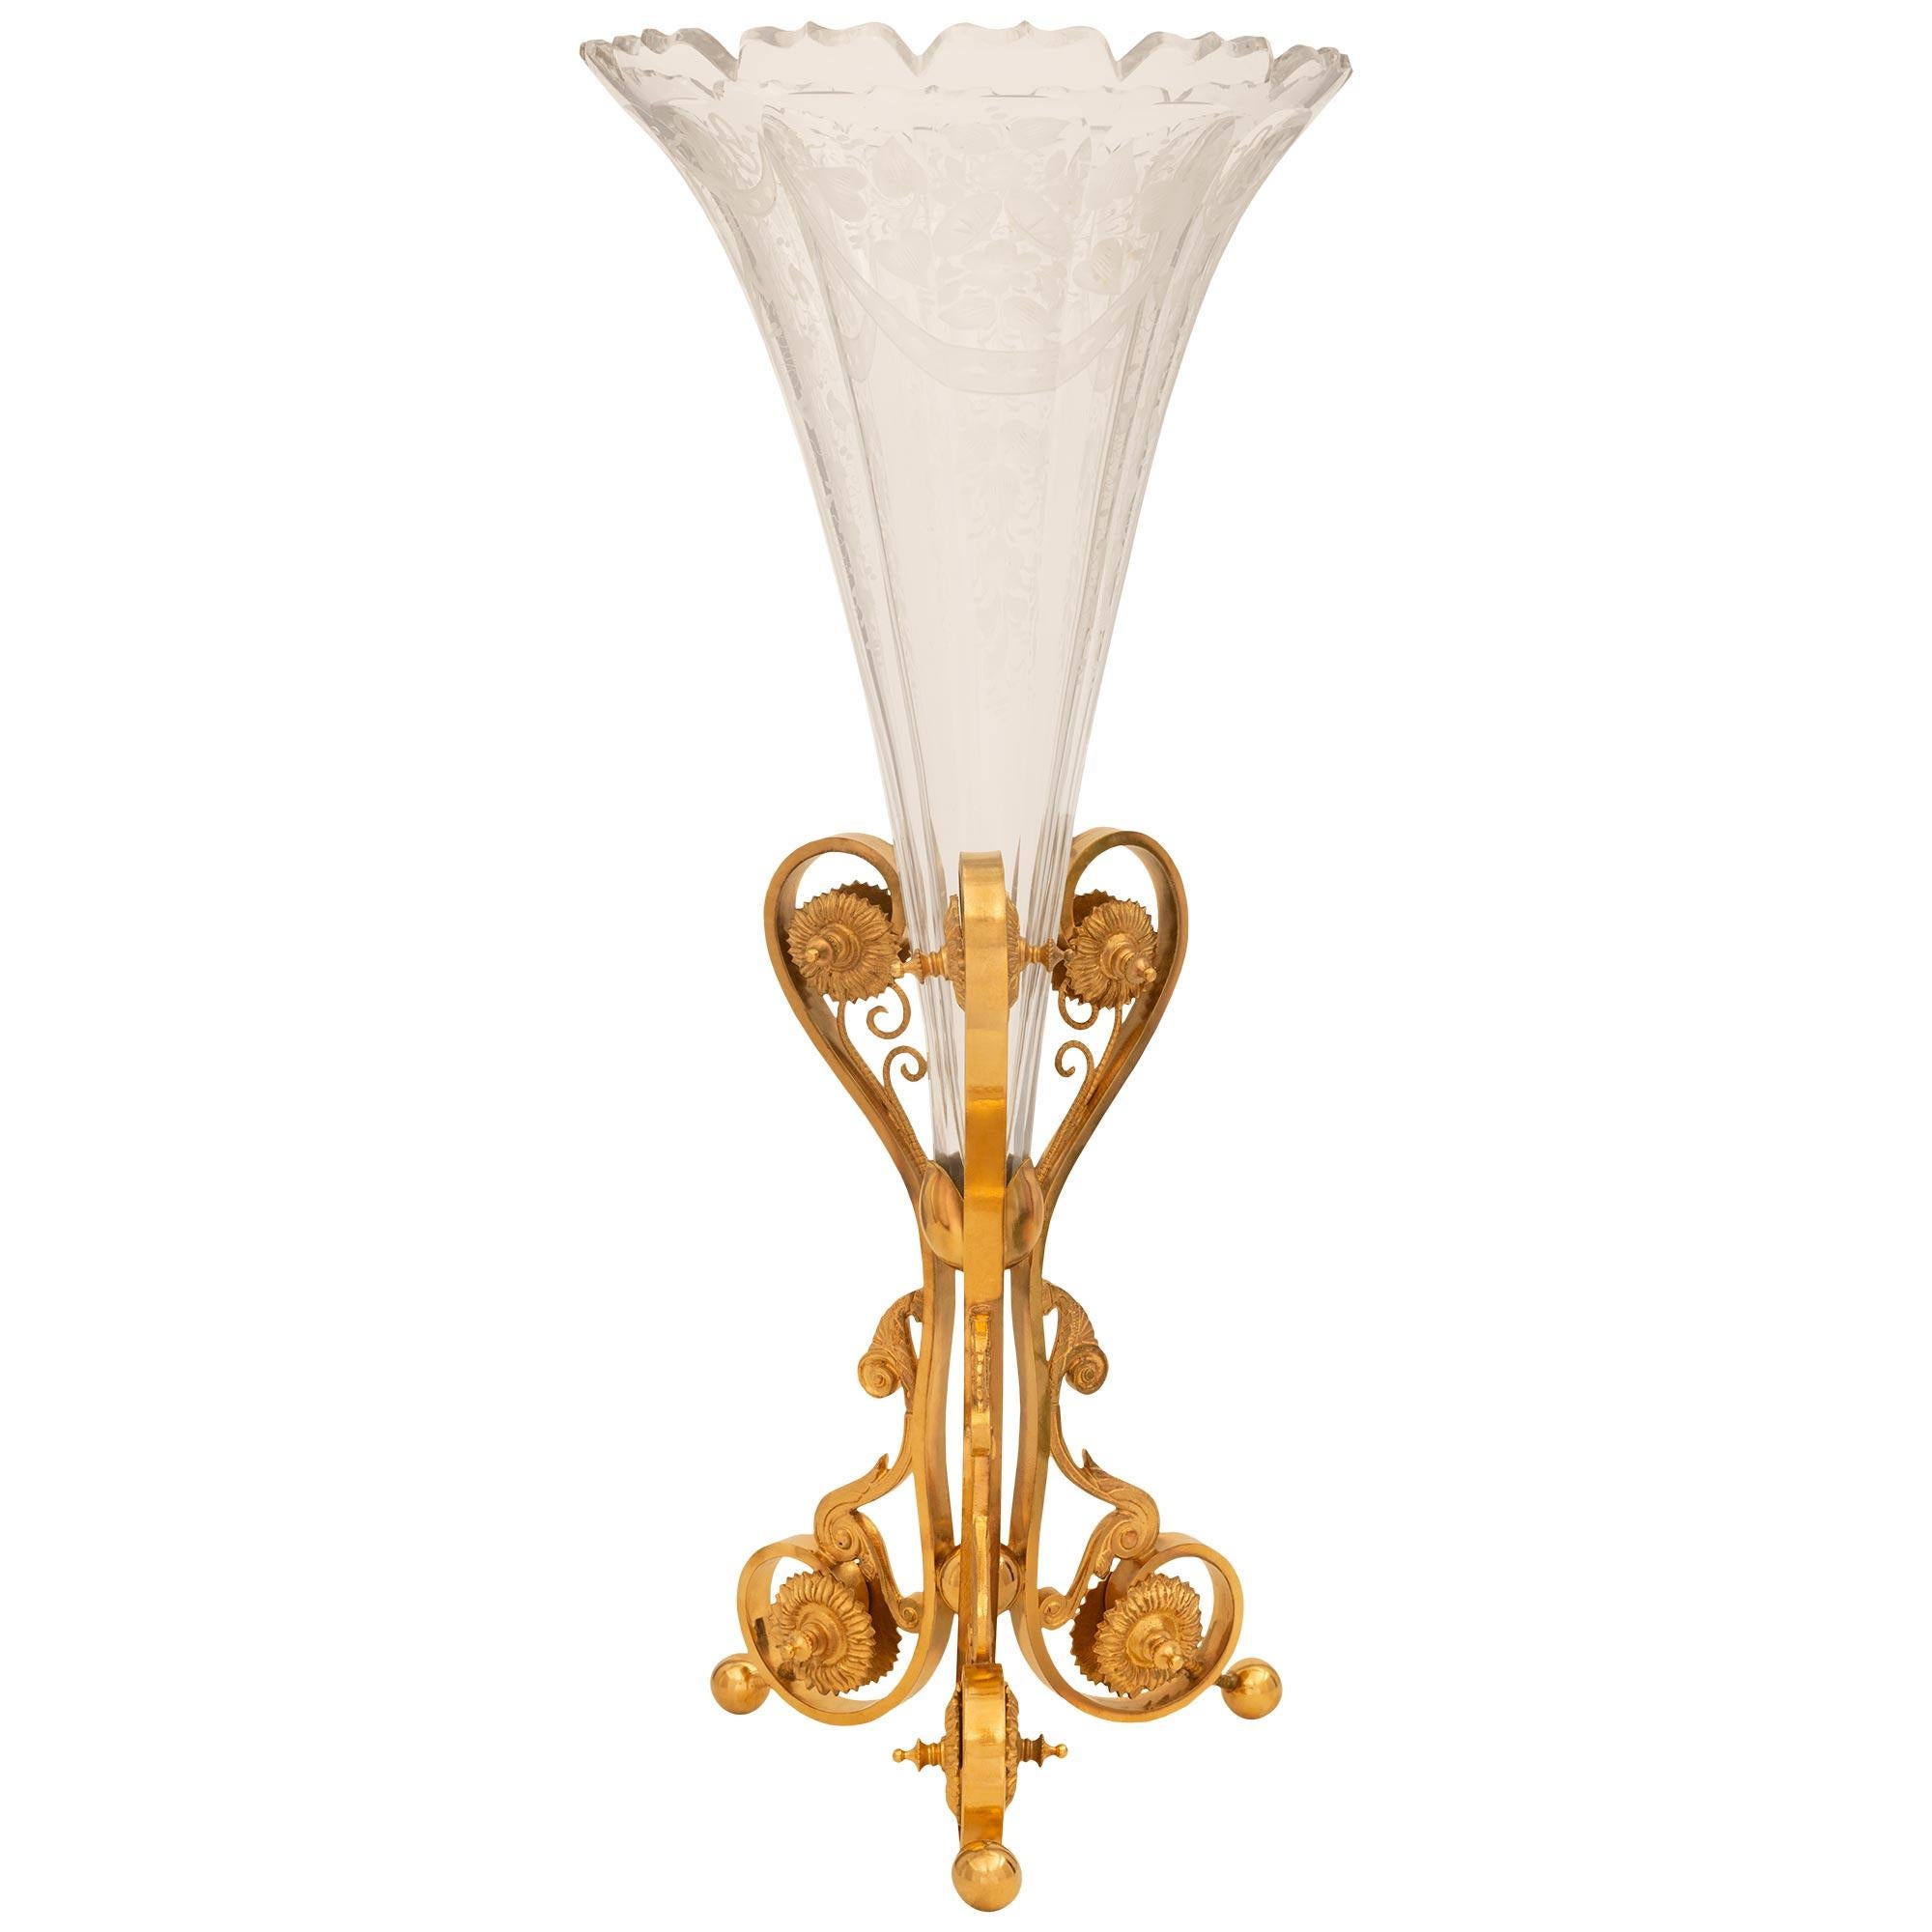 French Turn Of The Century Louis XVI St. Baccarat Crystal & Ormolu Mounted Vase For Sale 4